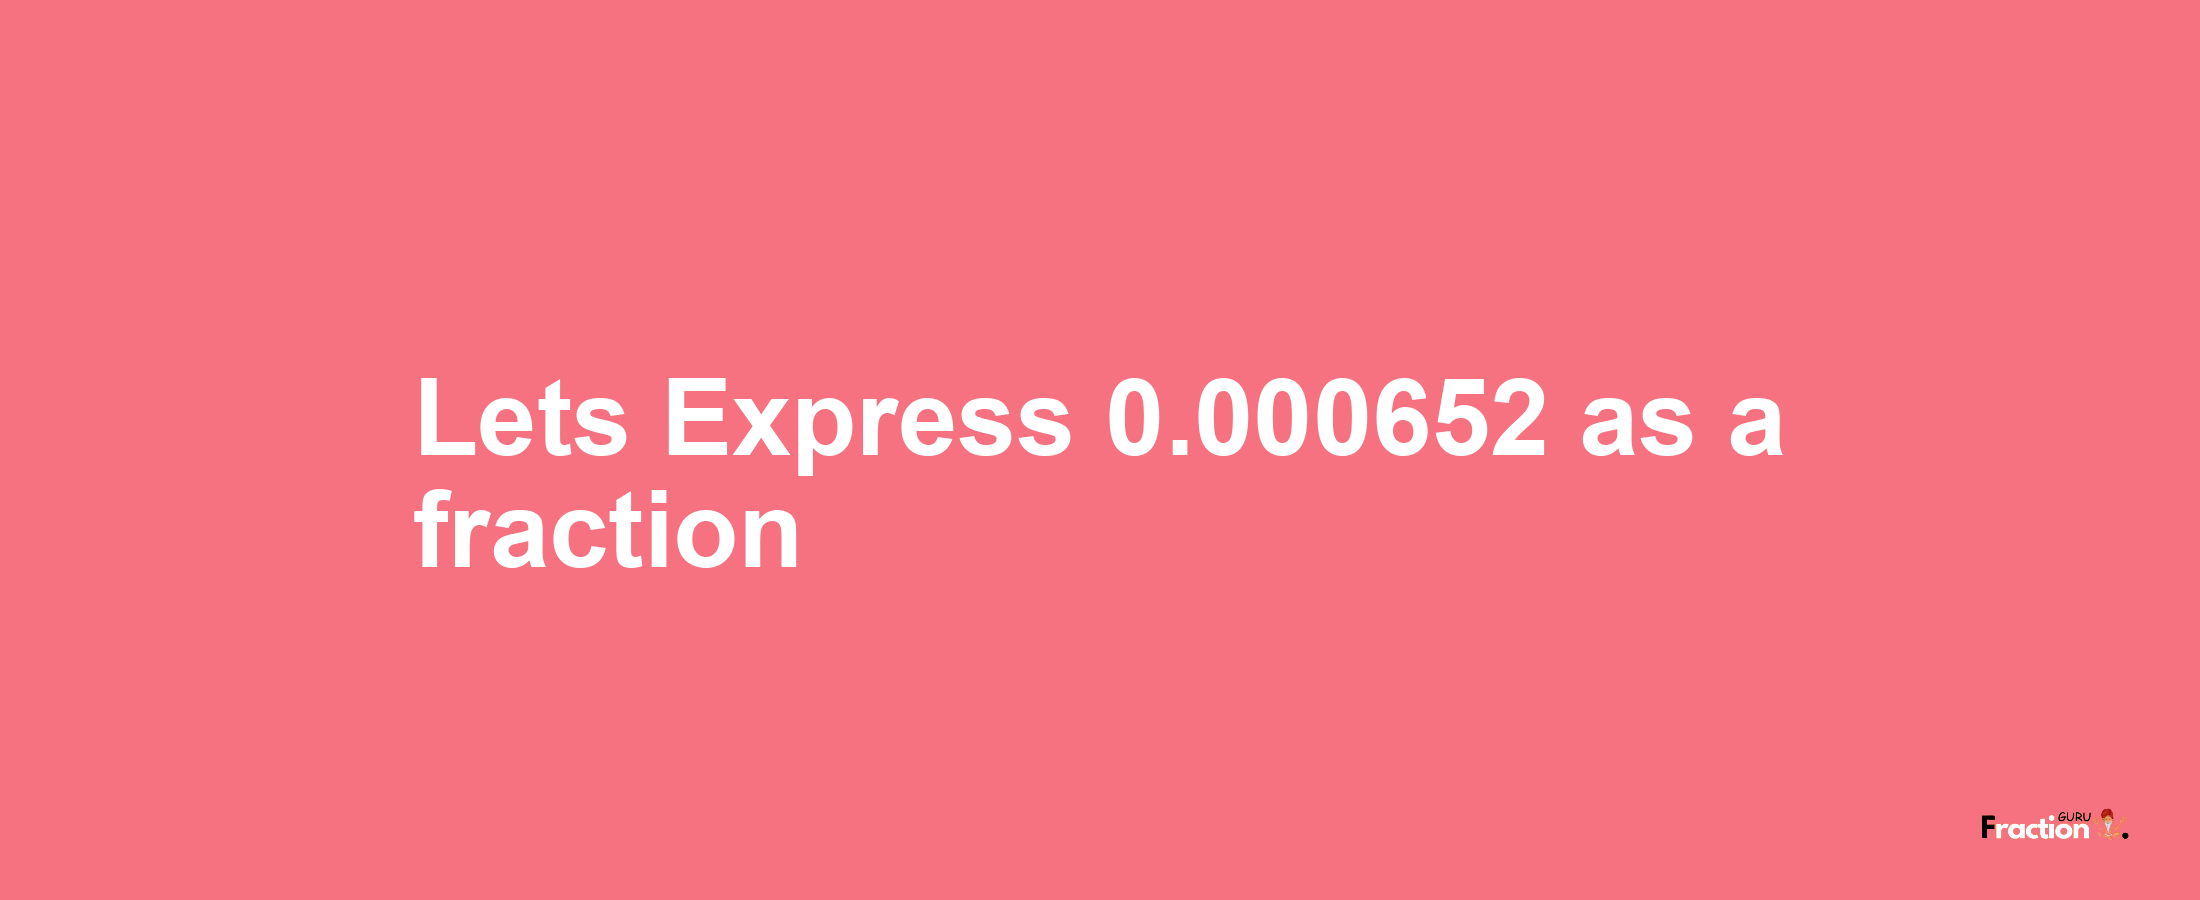 Lets Express 0.000652 as afraction